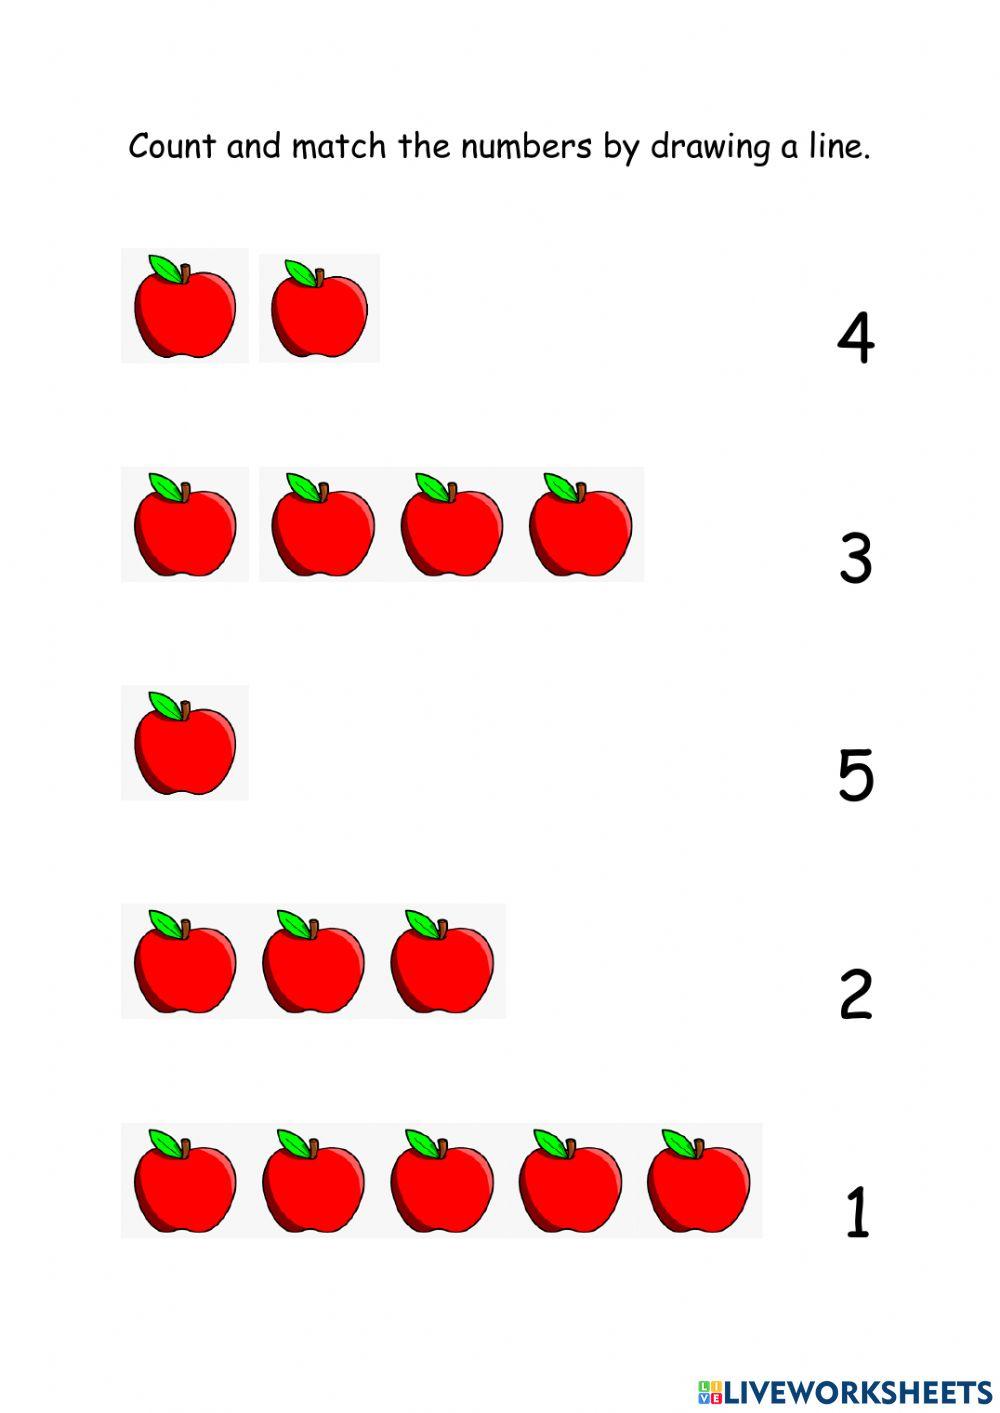 Counting 1-5